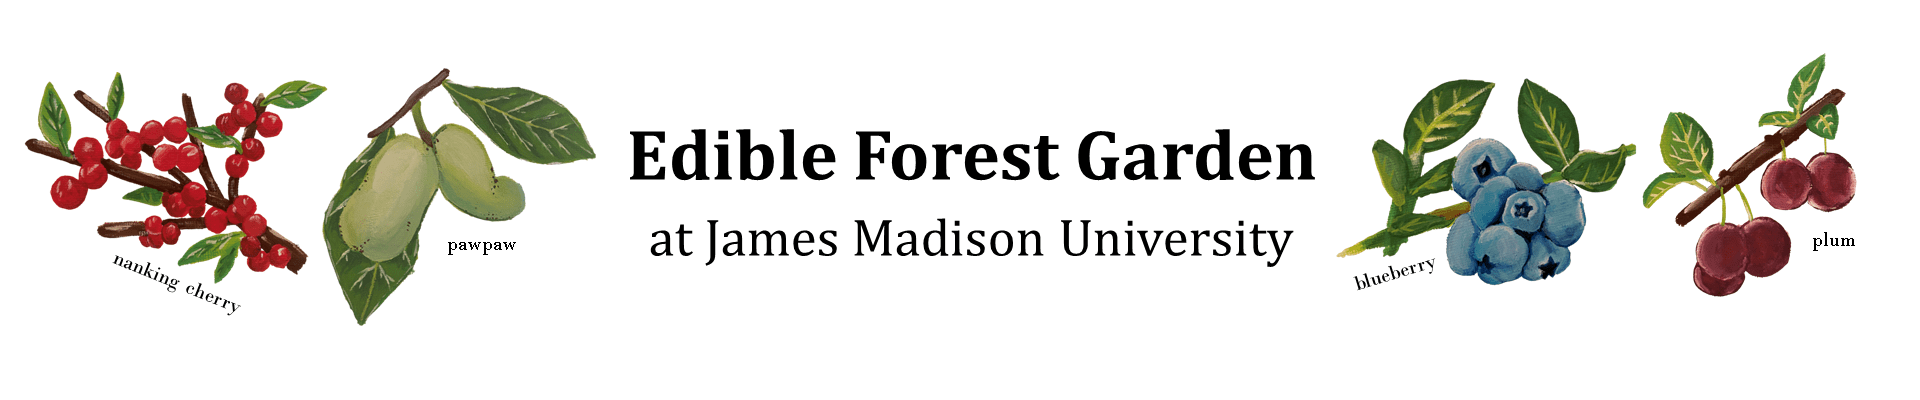 Edible Food Forest